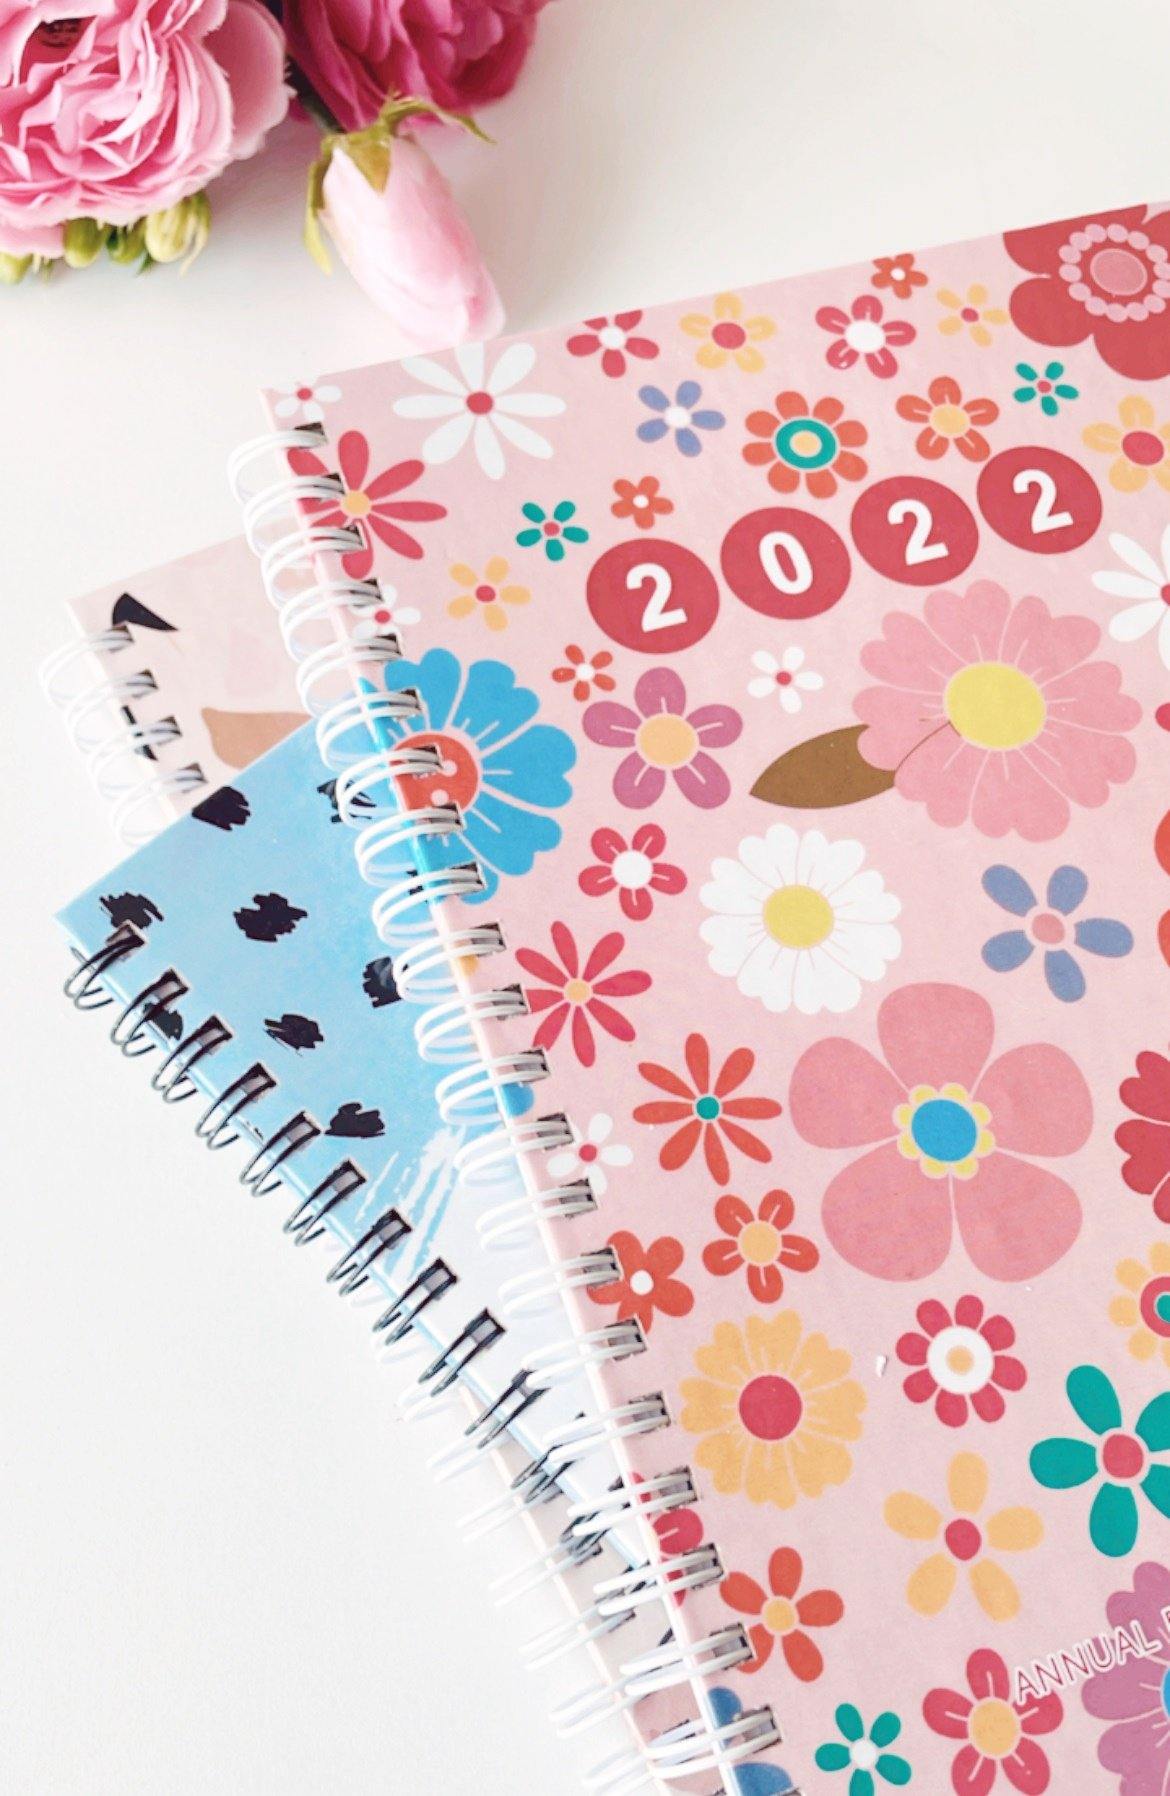 "My Year" Annual Planner 2022 with dates | Available in 3 designs | Hardcover Spiral | 140 pages - Supple Room